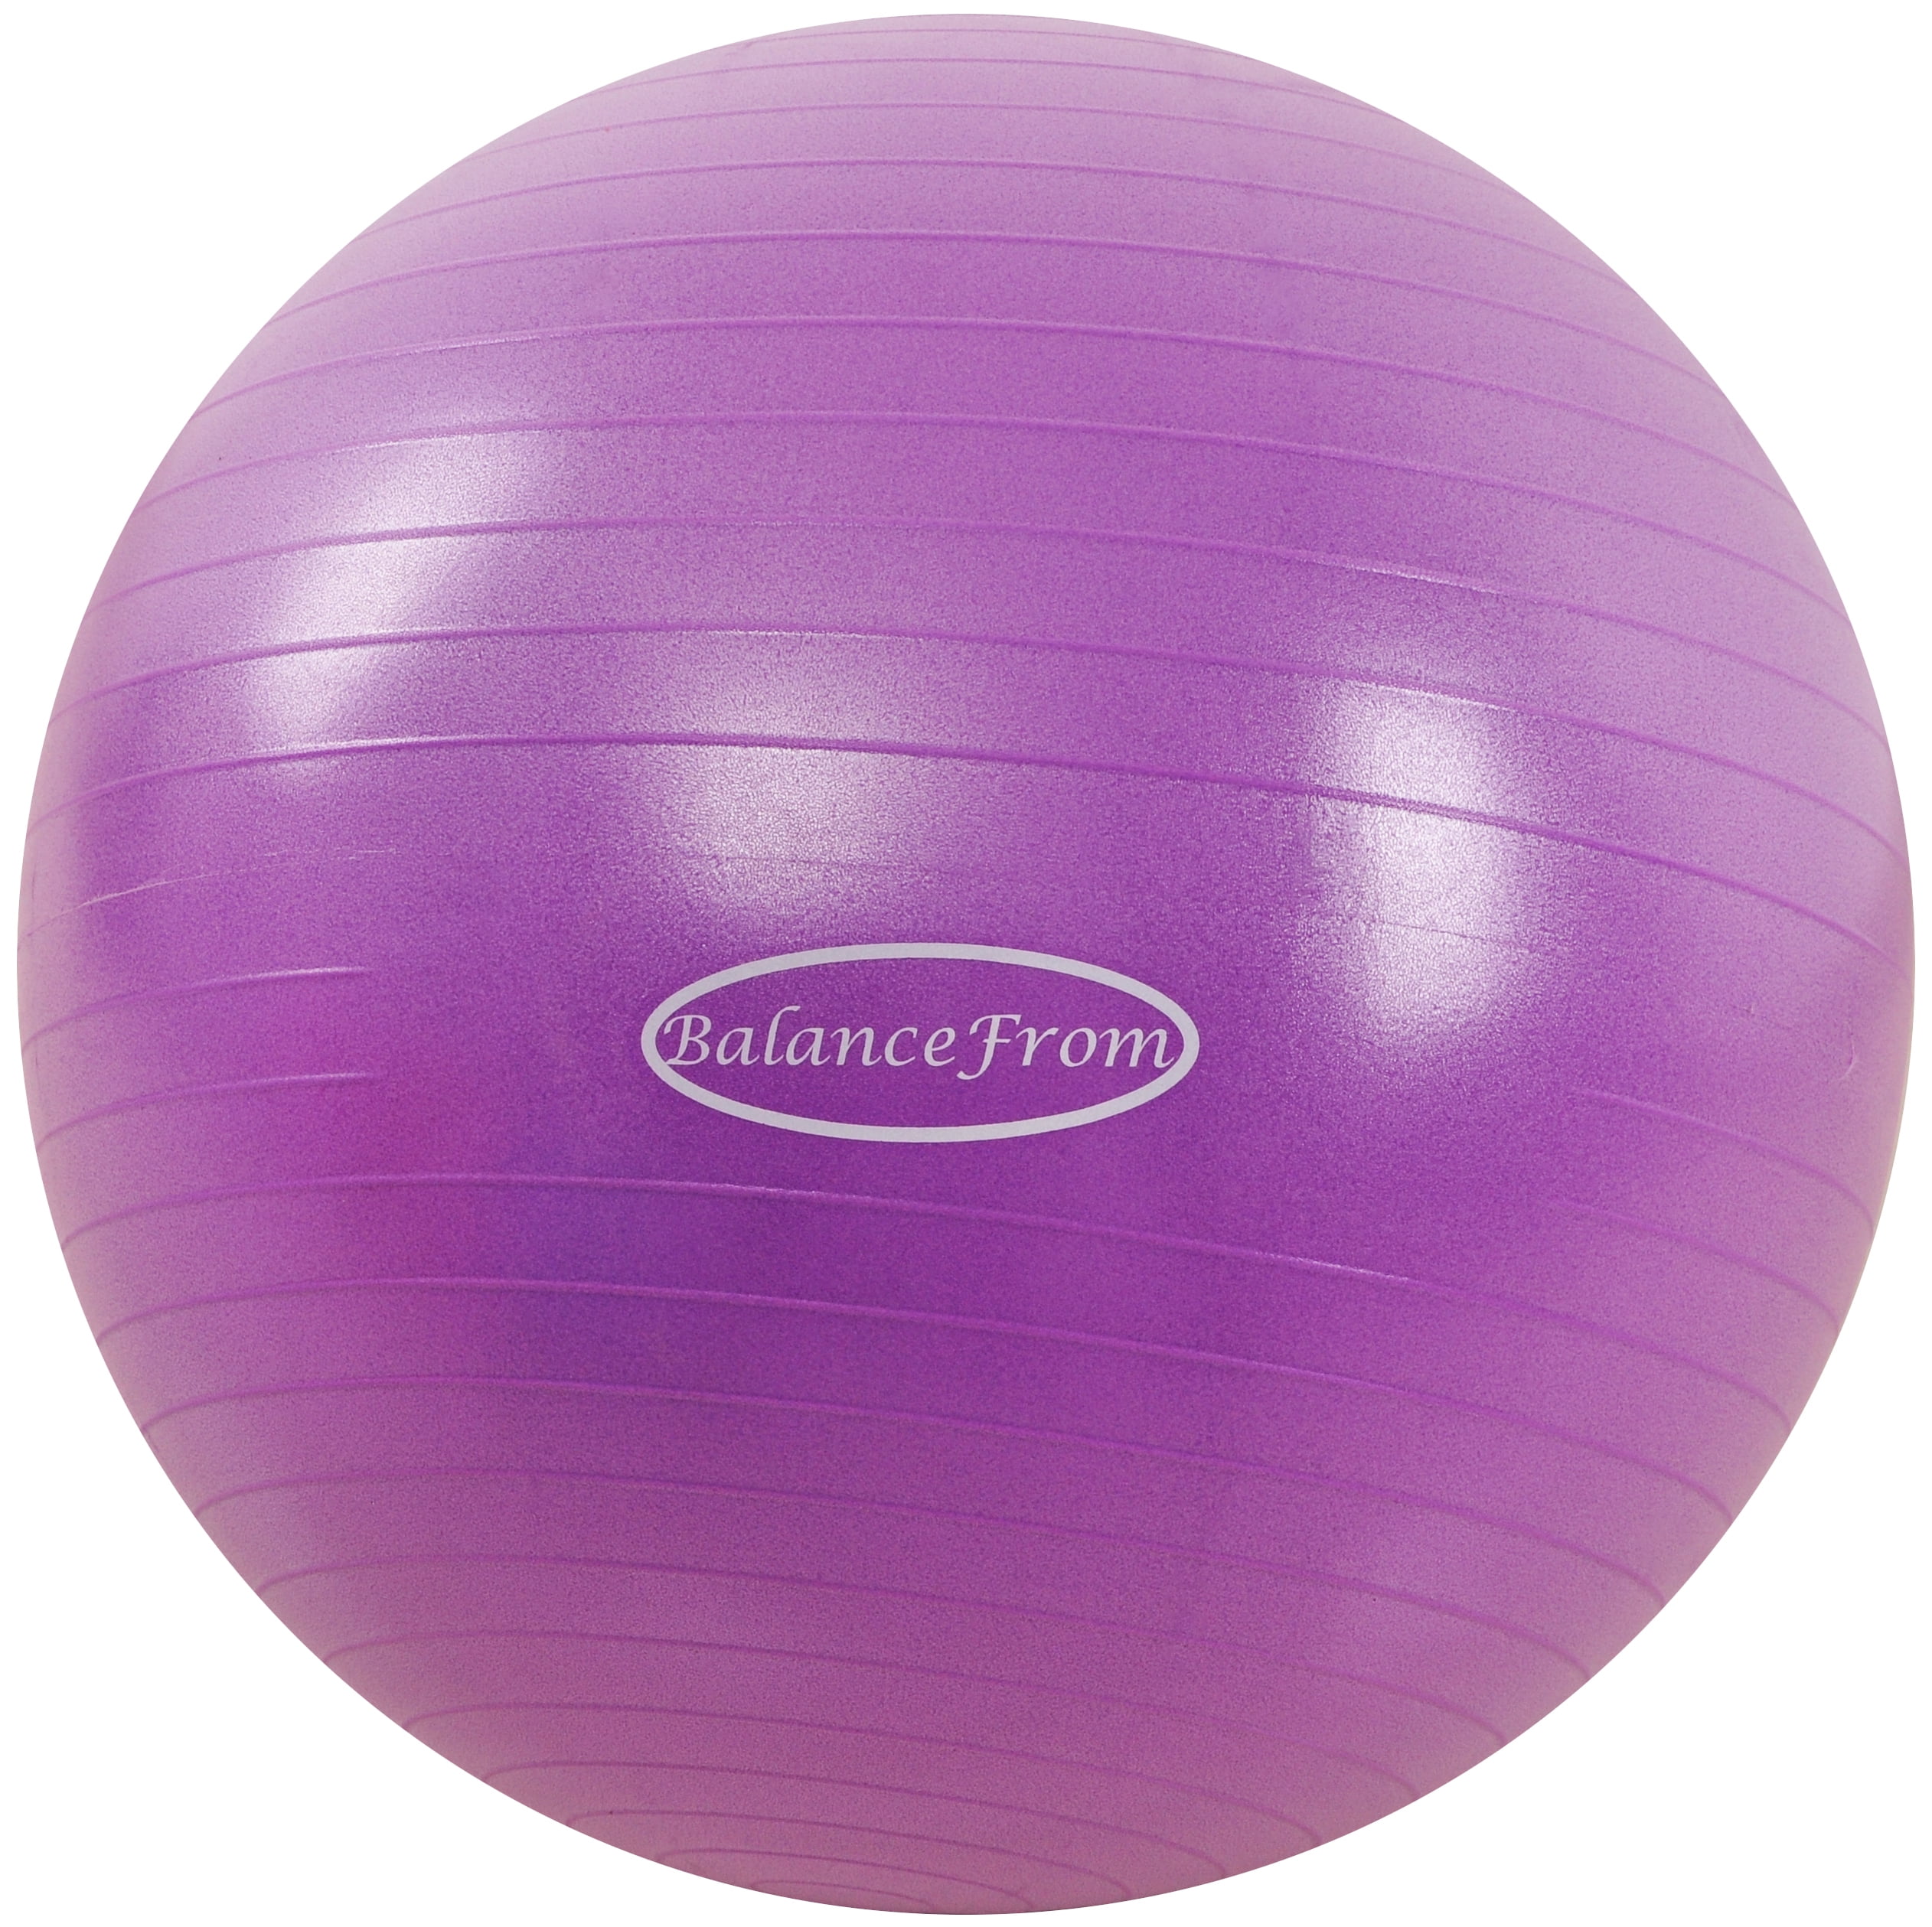 2,000-Pound Capacity BalanceFrom Anti-Burst and Slip Resistant Exercise Ball Yoga Ball Fitness Ball Birthing Ball with Quick Pump 